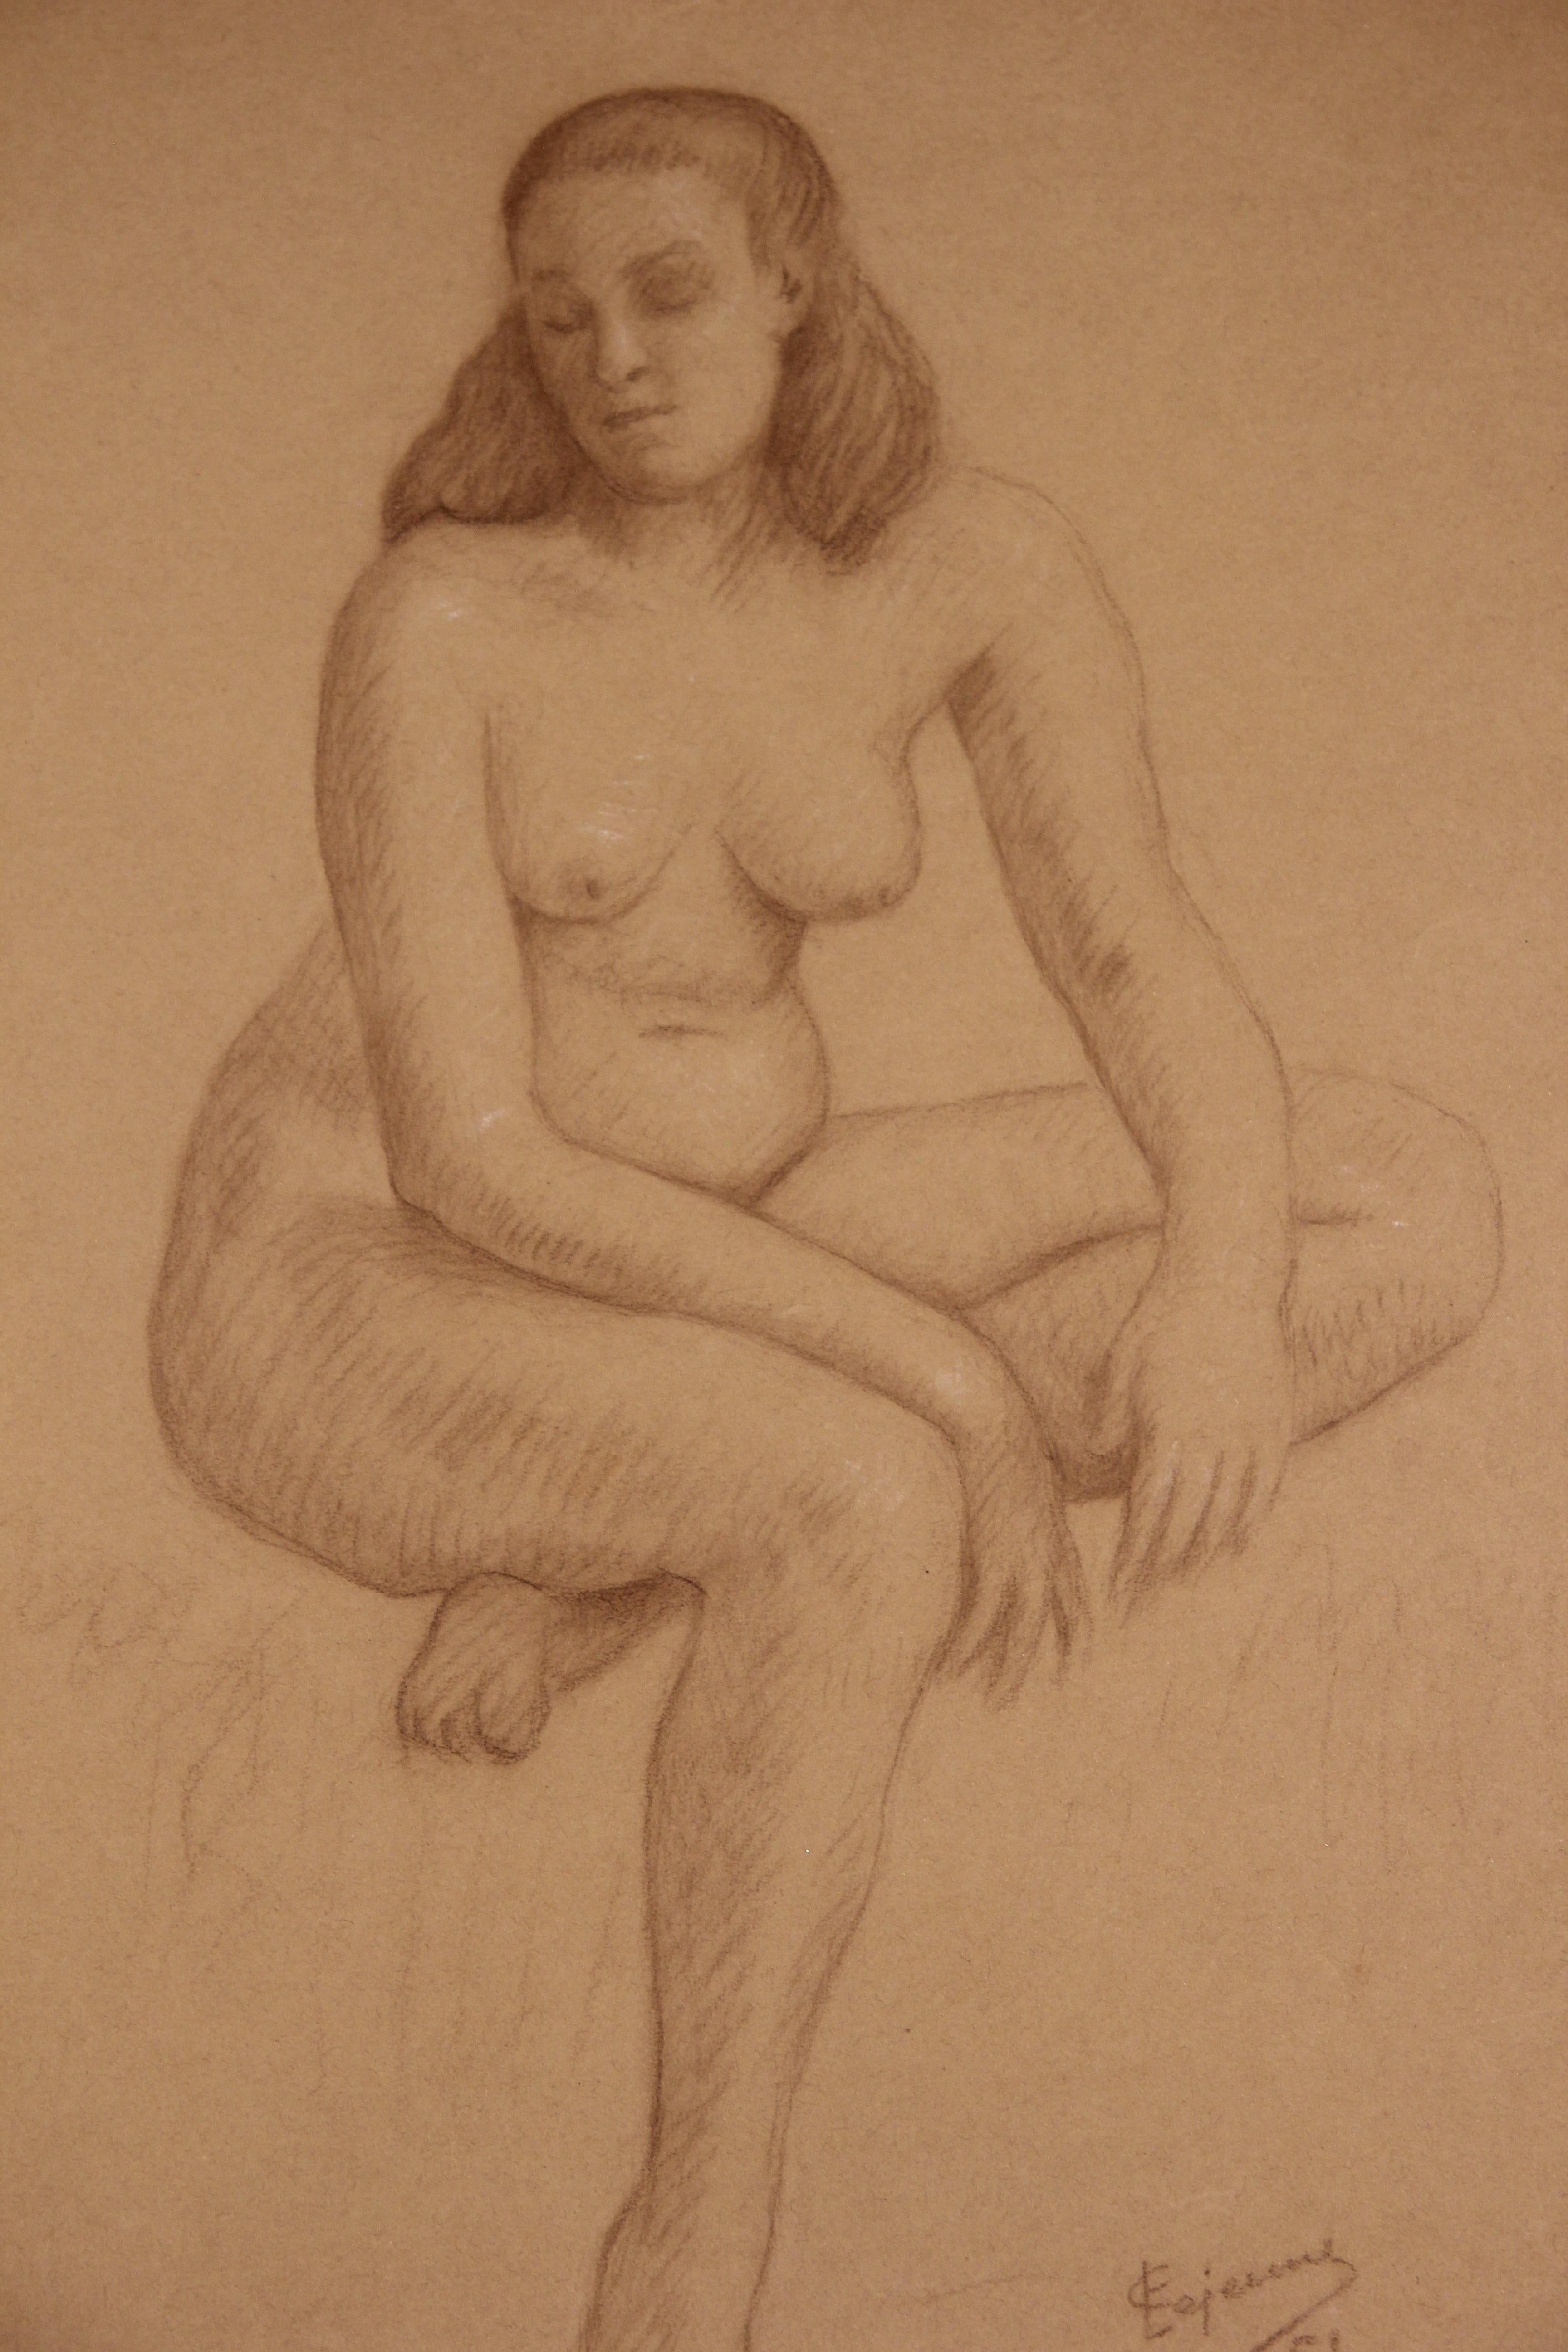 Seated Nude Woman Naturalistic Study - Art by Emile Lejeune